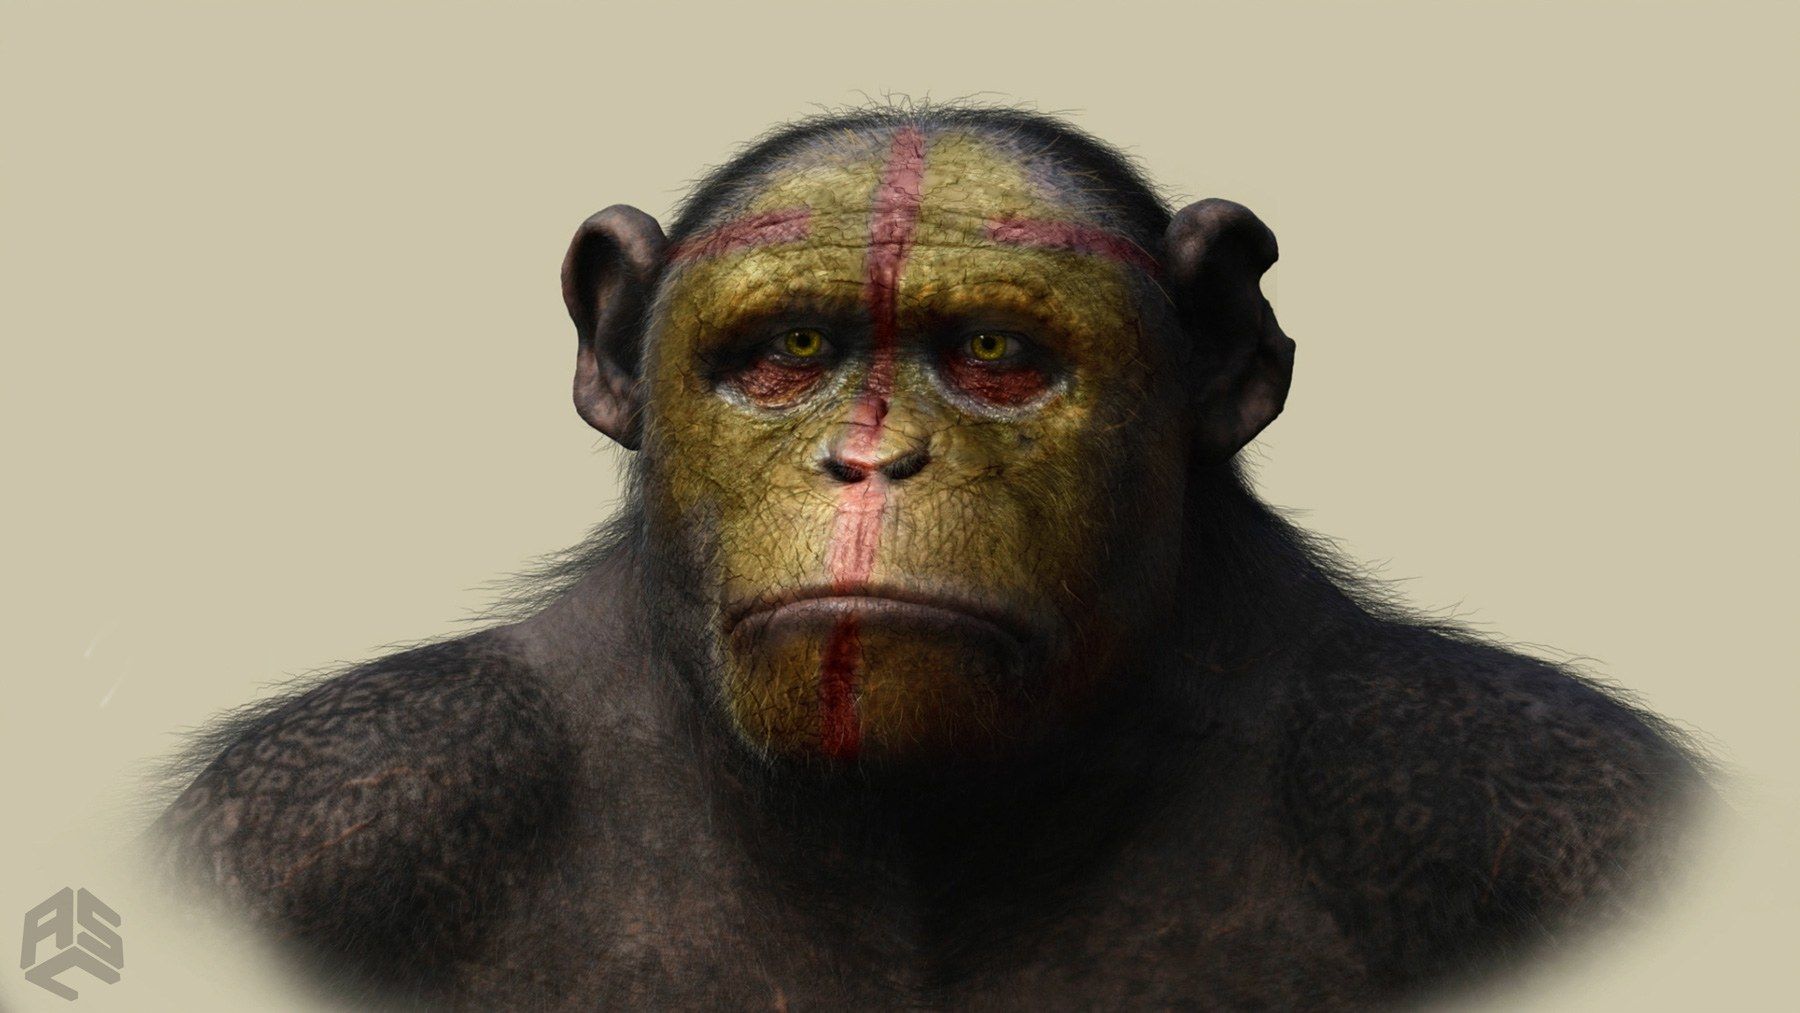 Ceremony Painted Male Ape